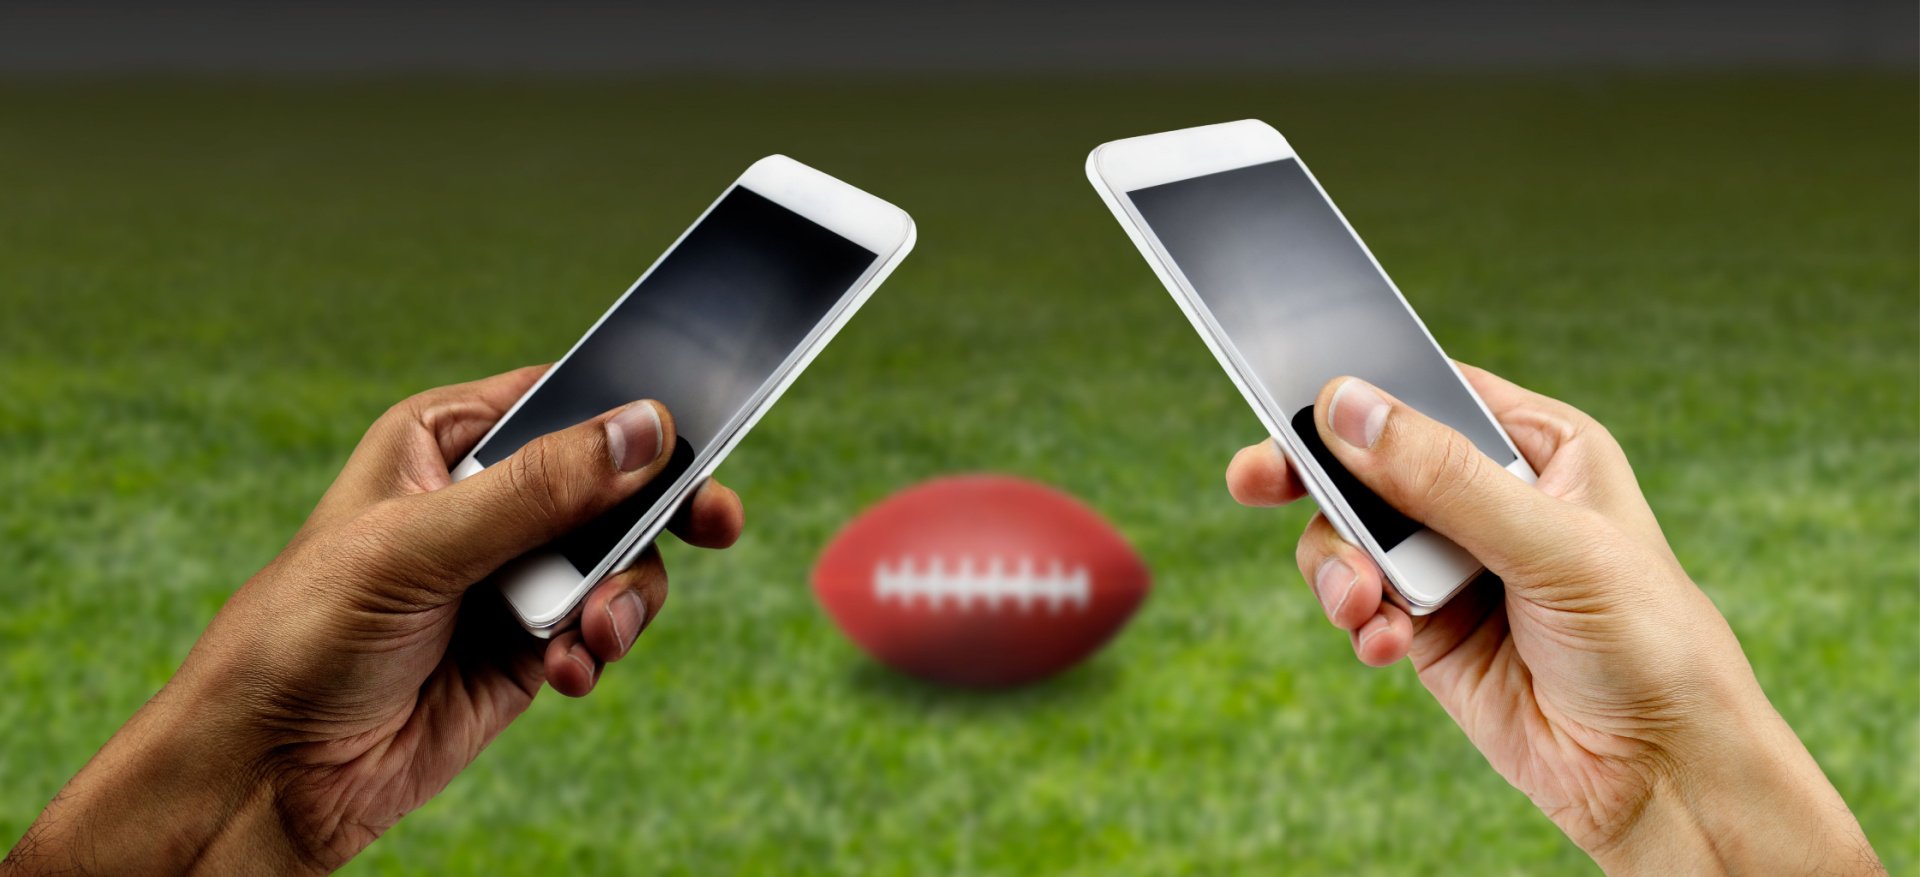 Two people holding iphones on an American football pitch